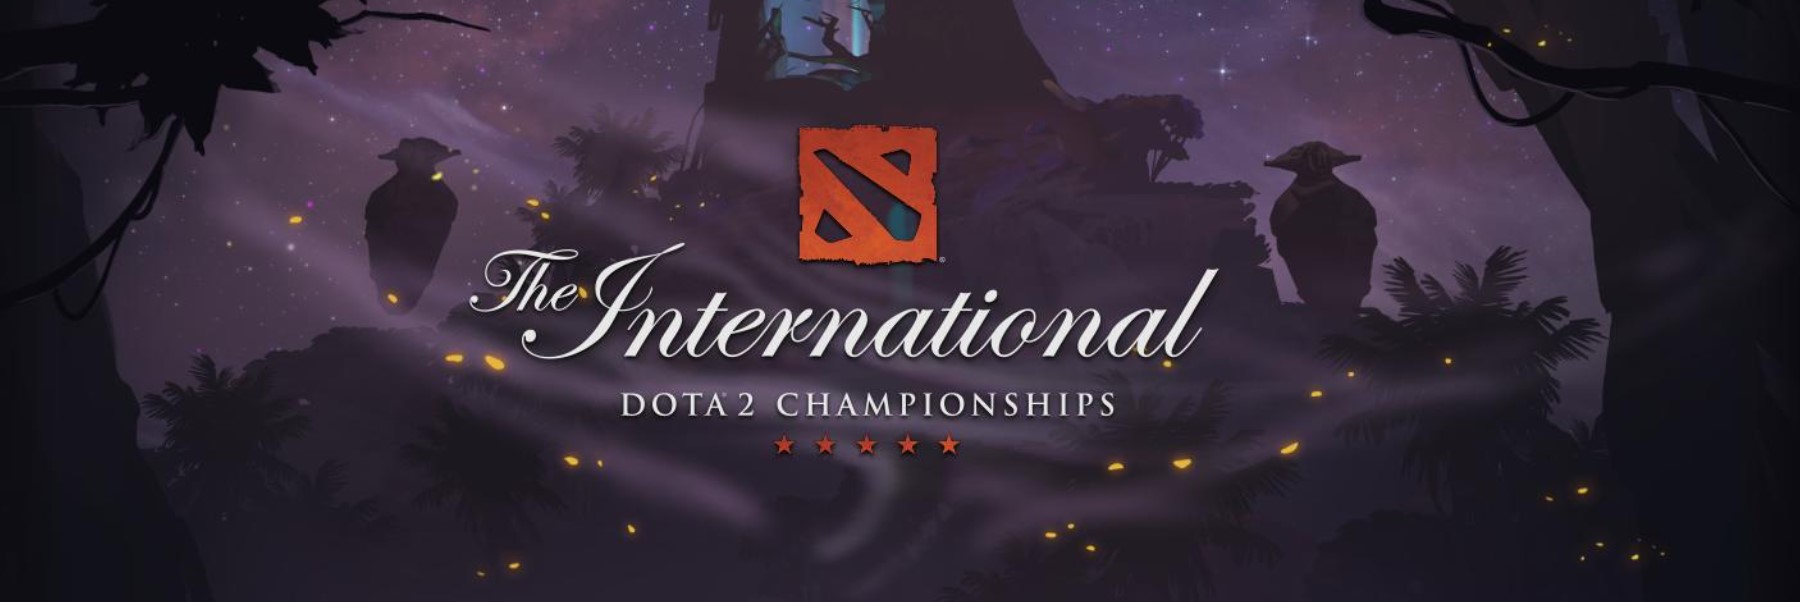 Dota 2 The International 10 starts next month, Check out teams, schedule & where to watch